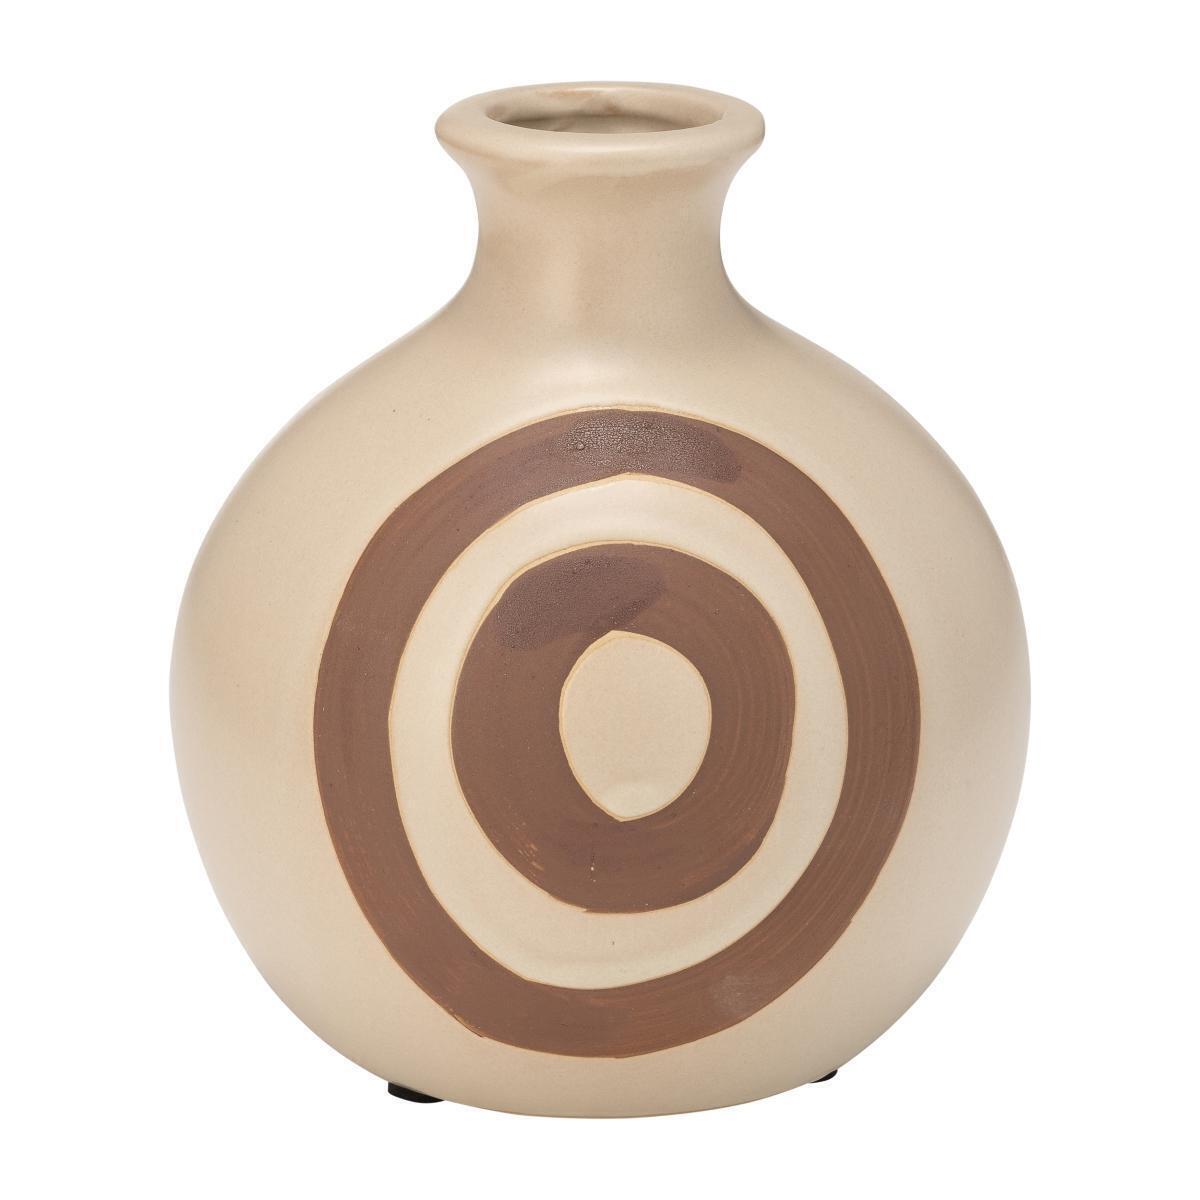 Shop Abstract Vase online